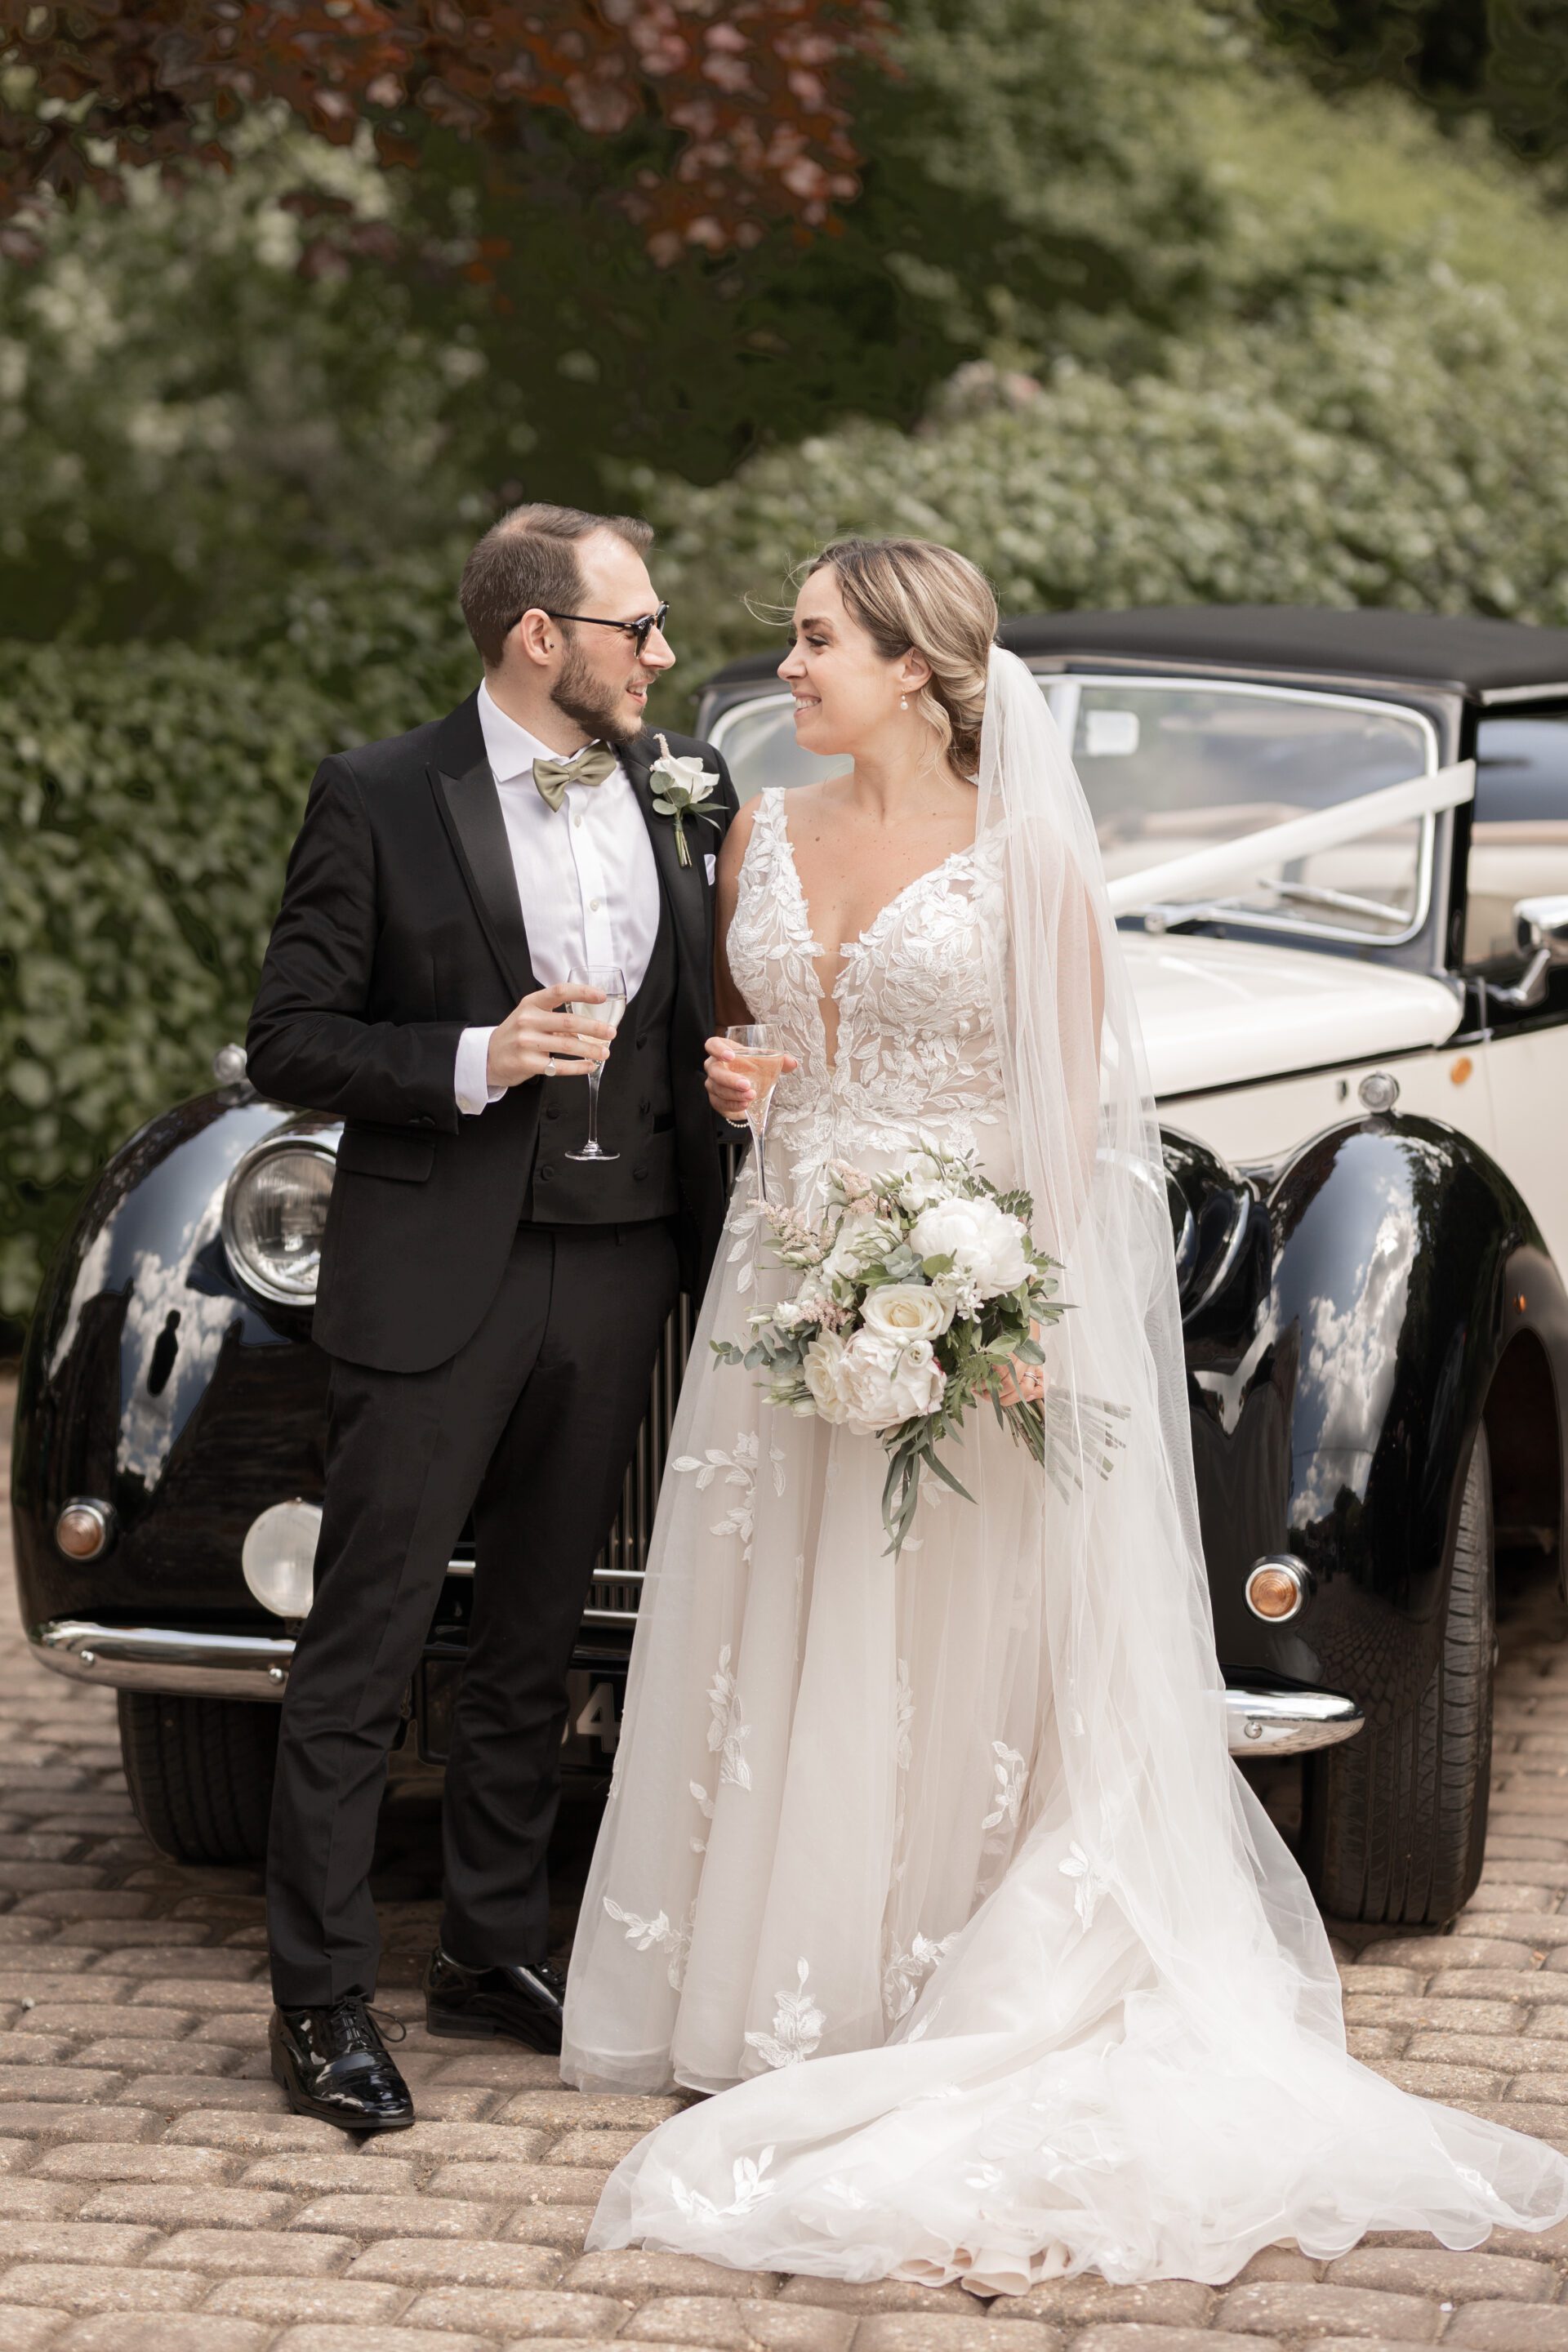 The bride and groom stop in front of their vintage wedding car